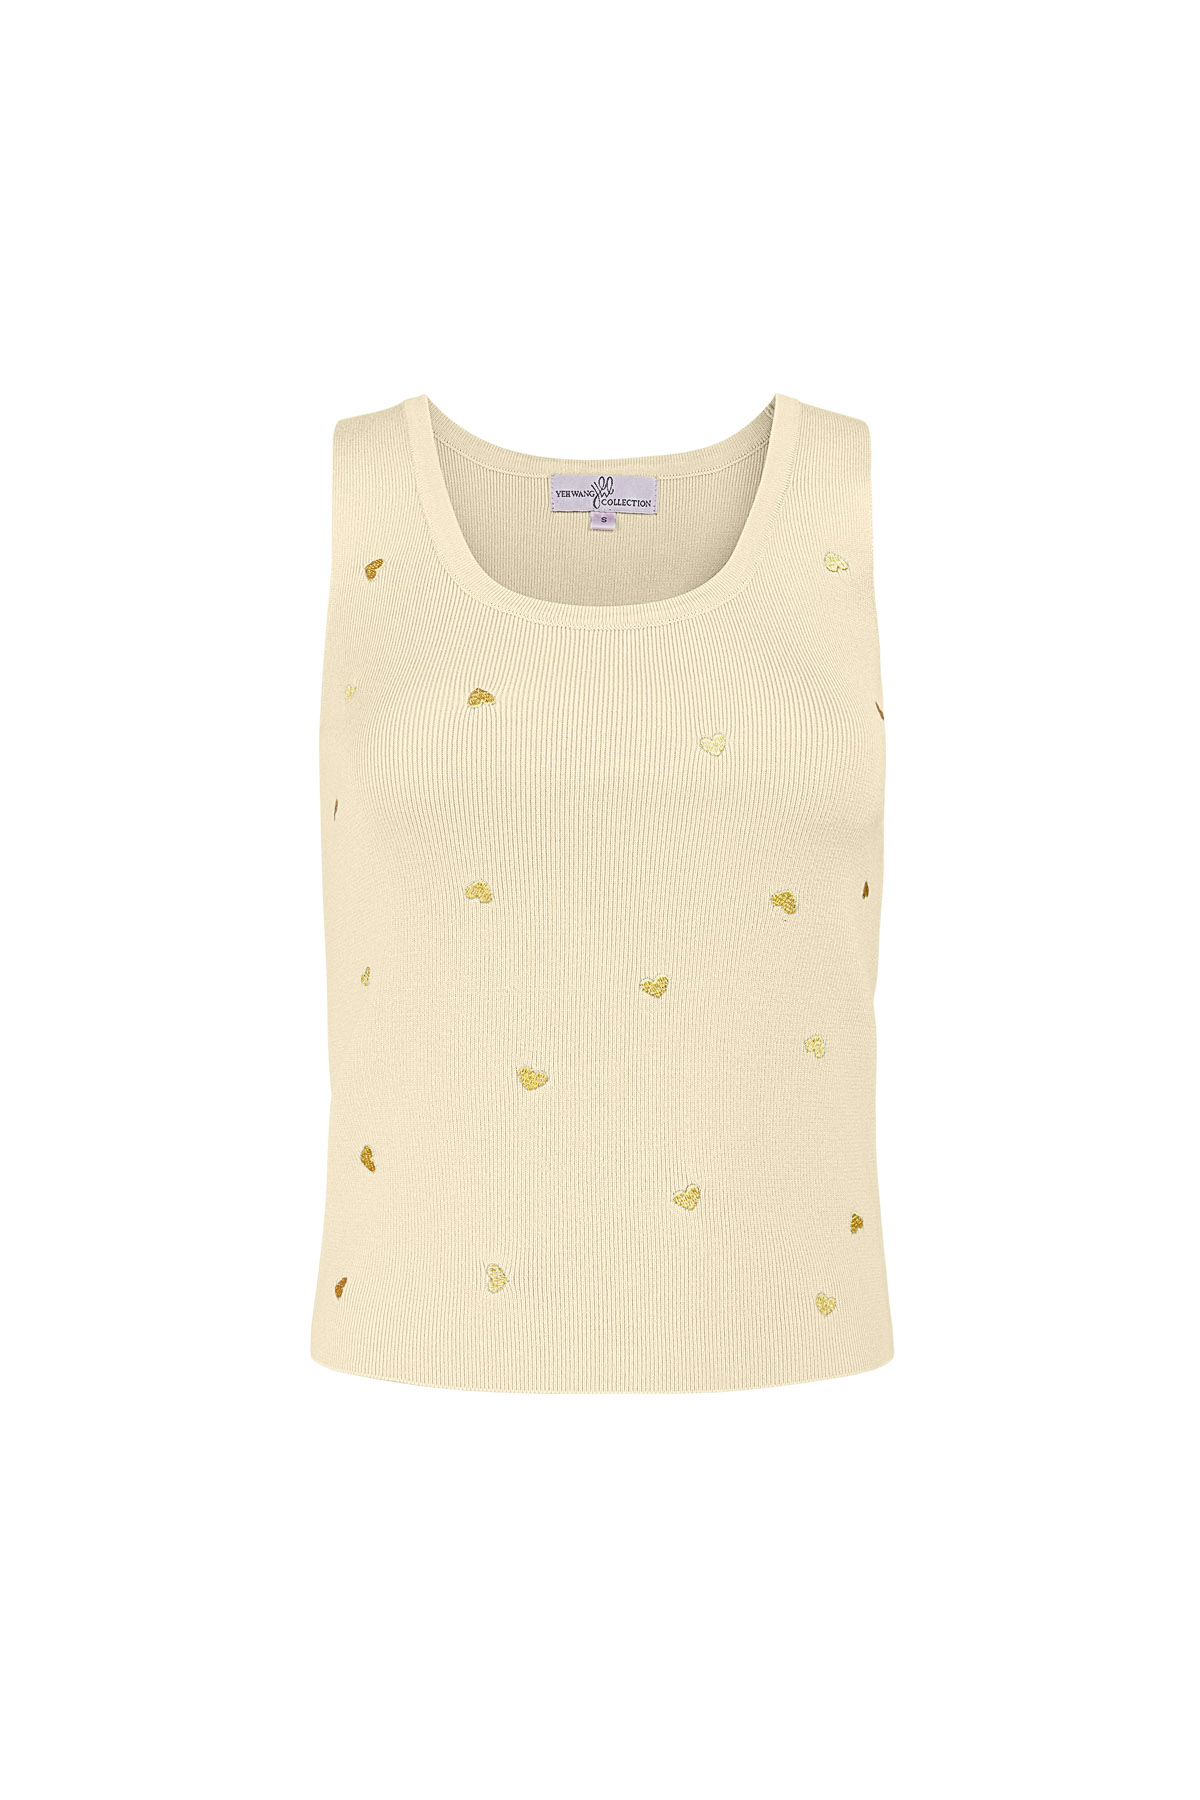 Sleeveless top with gold heart details small – beige h5 